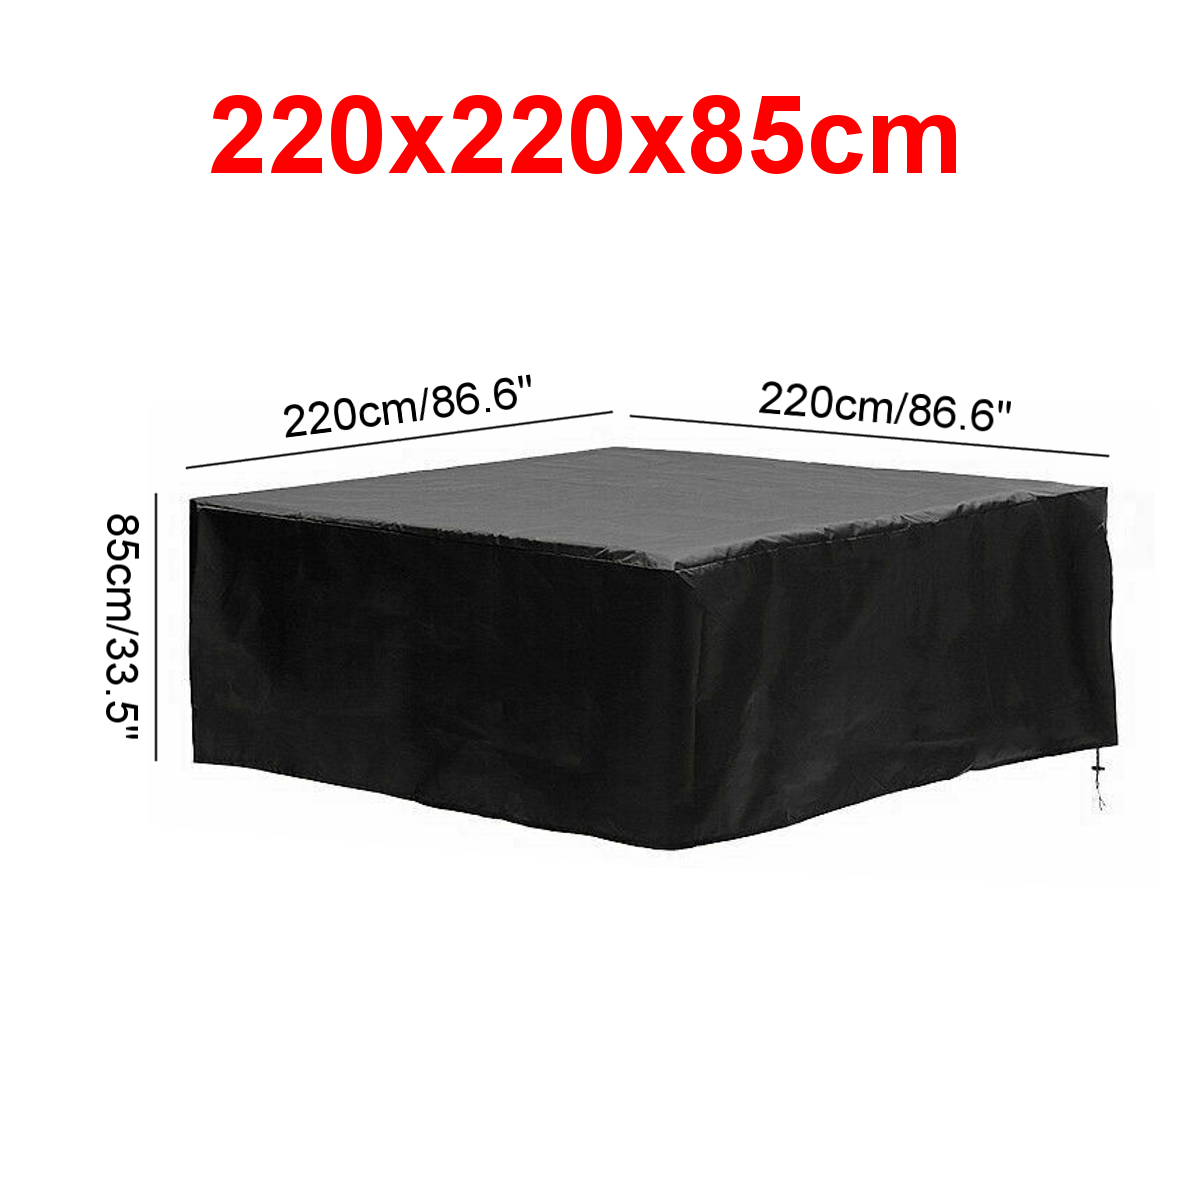 Hot-Tub-Spa-Cover-Cap-Guard-Waterproof-Dust-Protector-Harsh-Weather-1781959-6